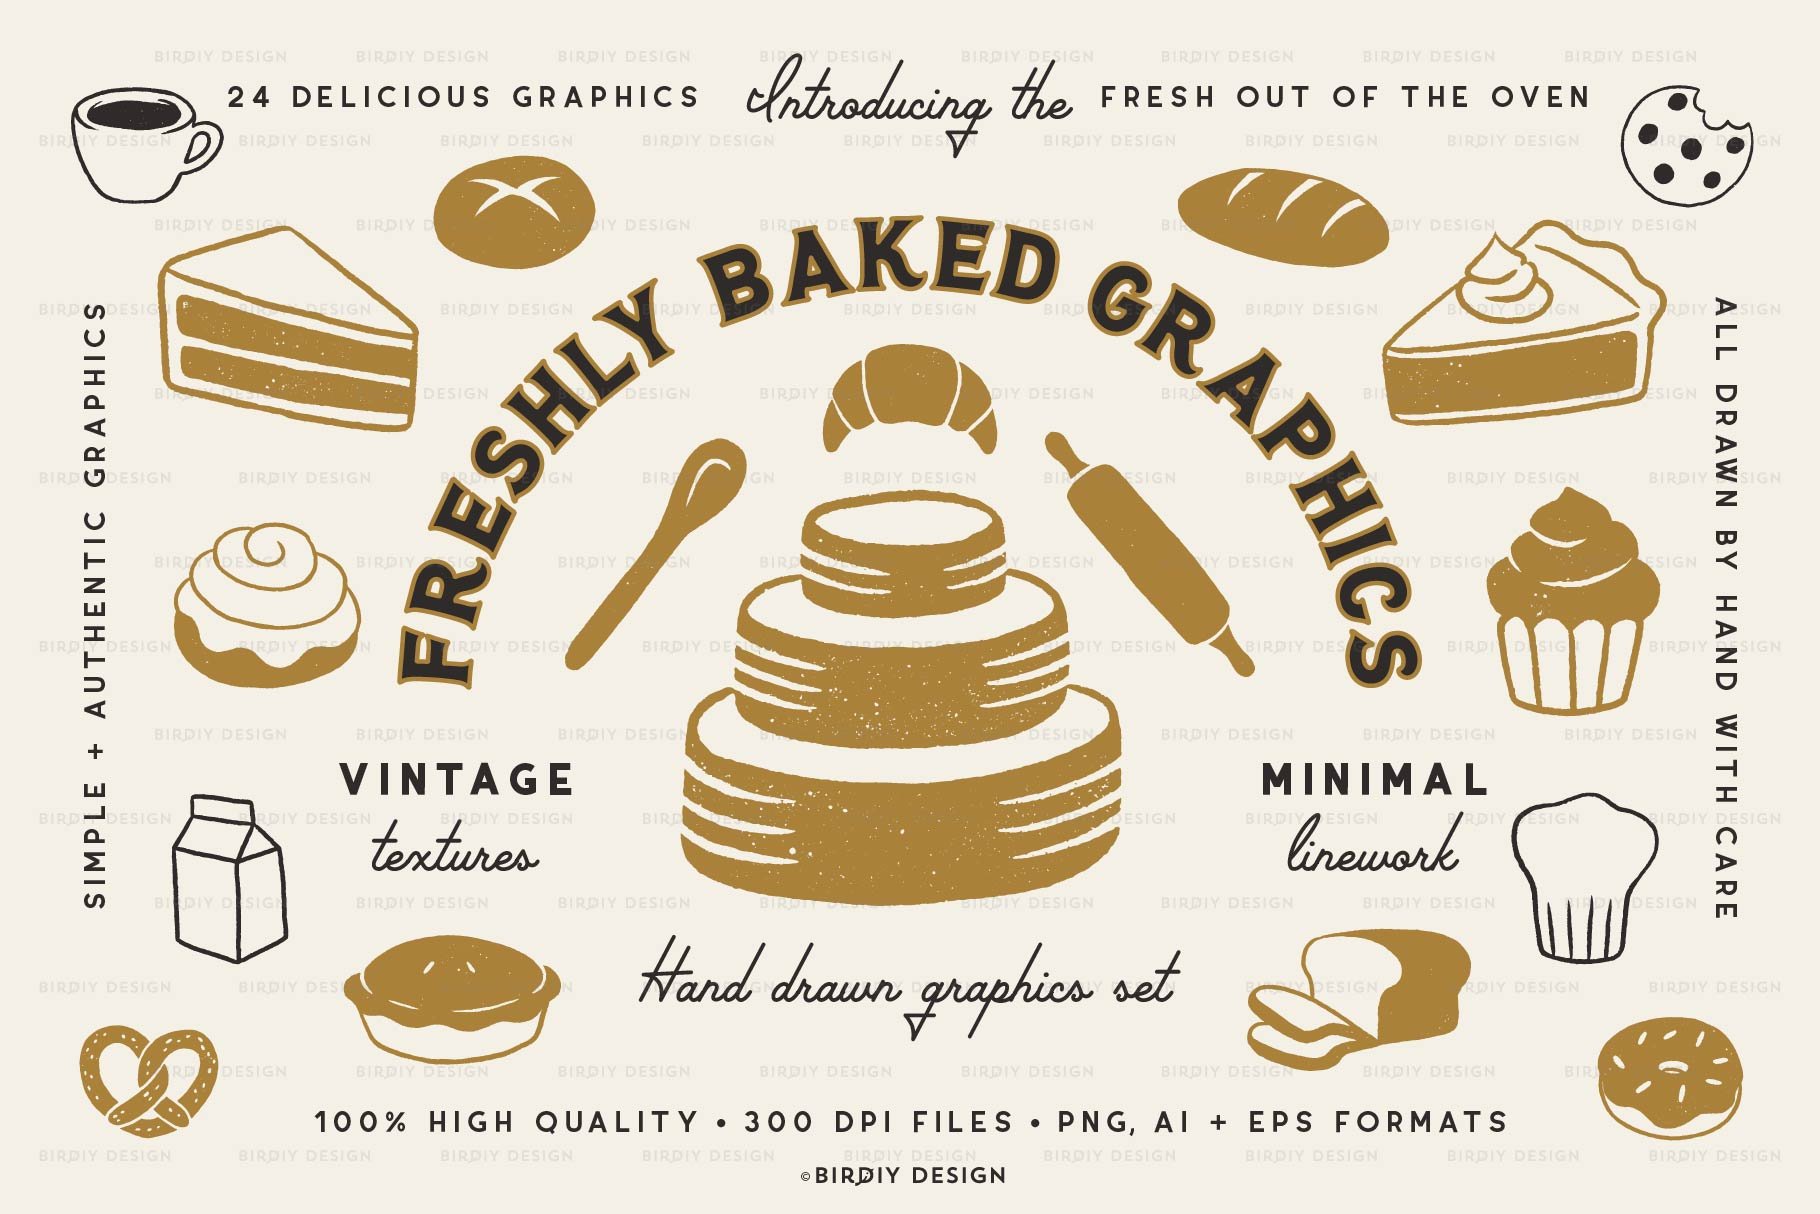 Freshly Baked Graphics Bakery Icons cover image.